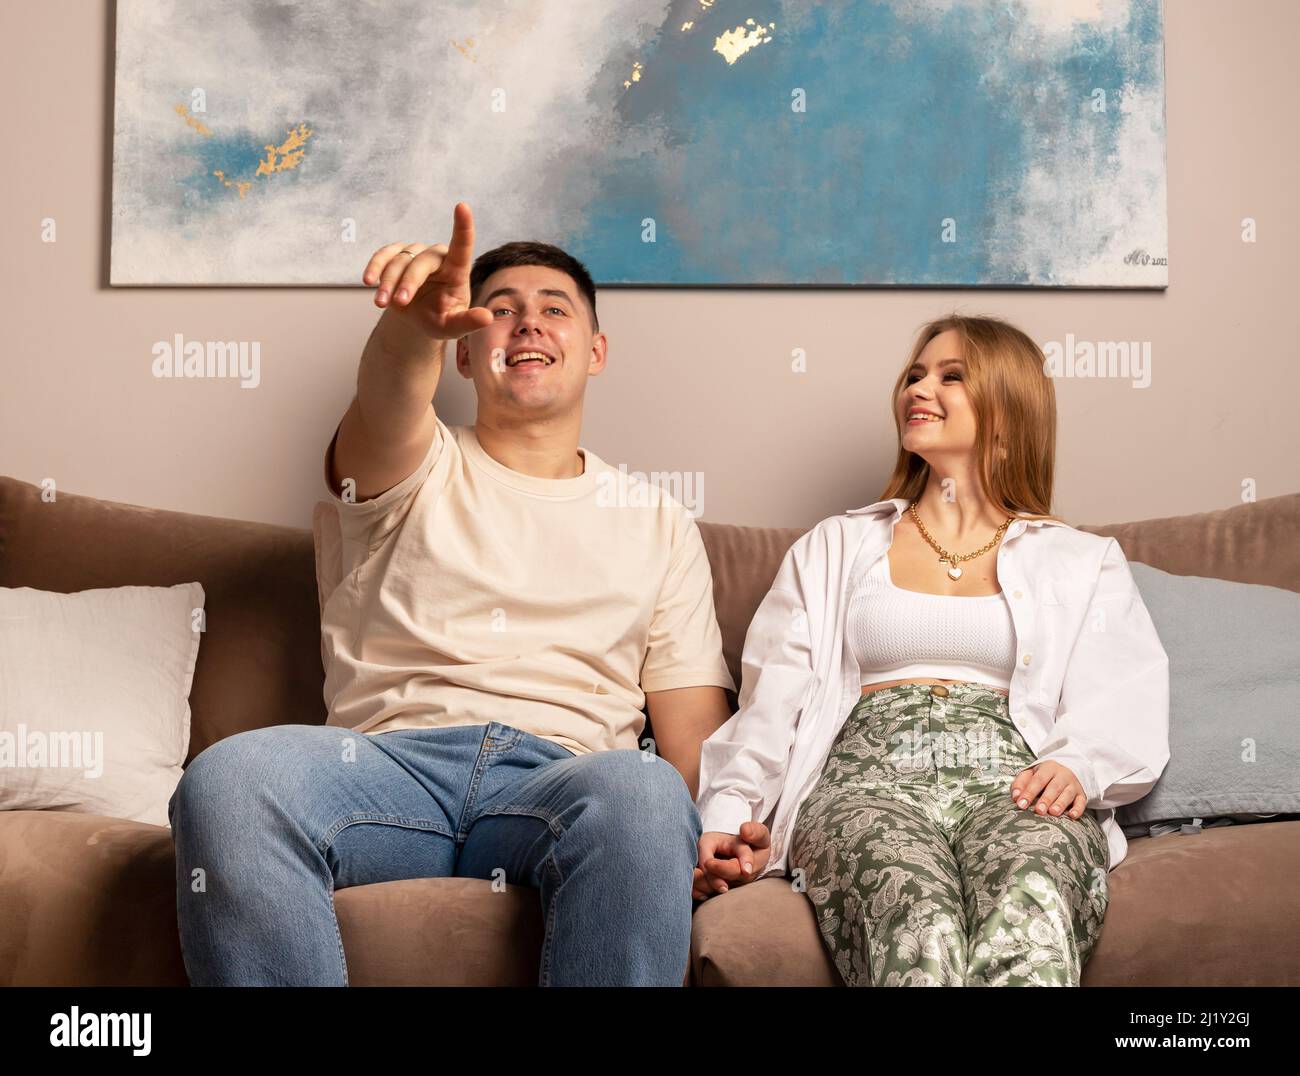 Minsk Belarus - 23 March 2022 Young couple sitting on couch, laughing and watching TV. Handsome man pointing at screen. Beautiful woman looking at husband or boyfriend. Happy spending time together . Stock Photo